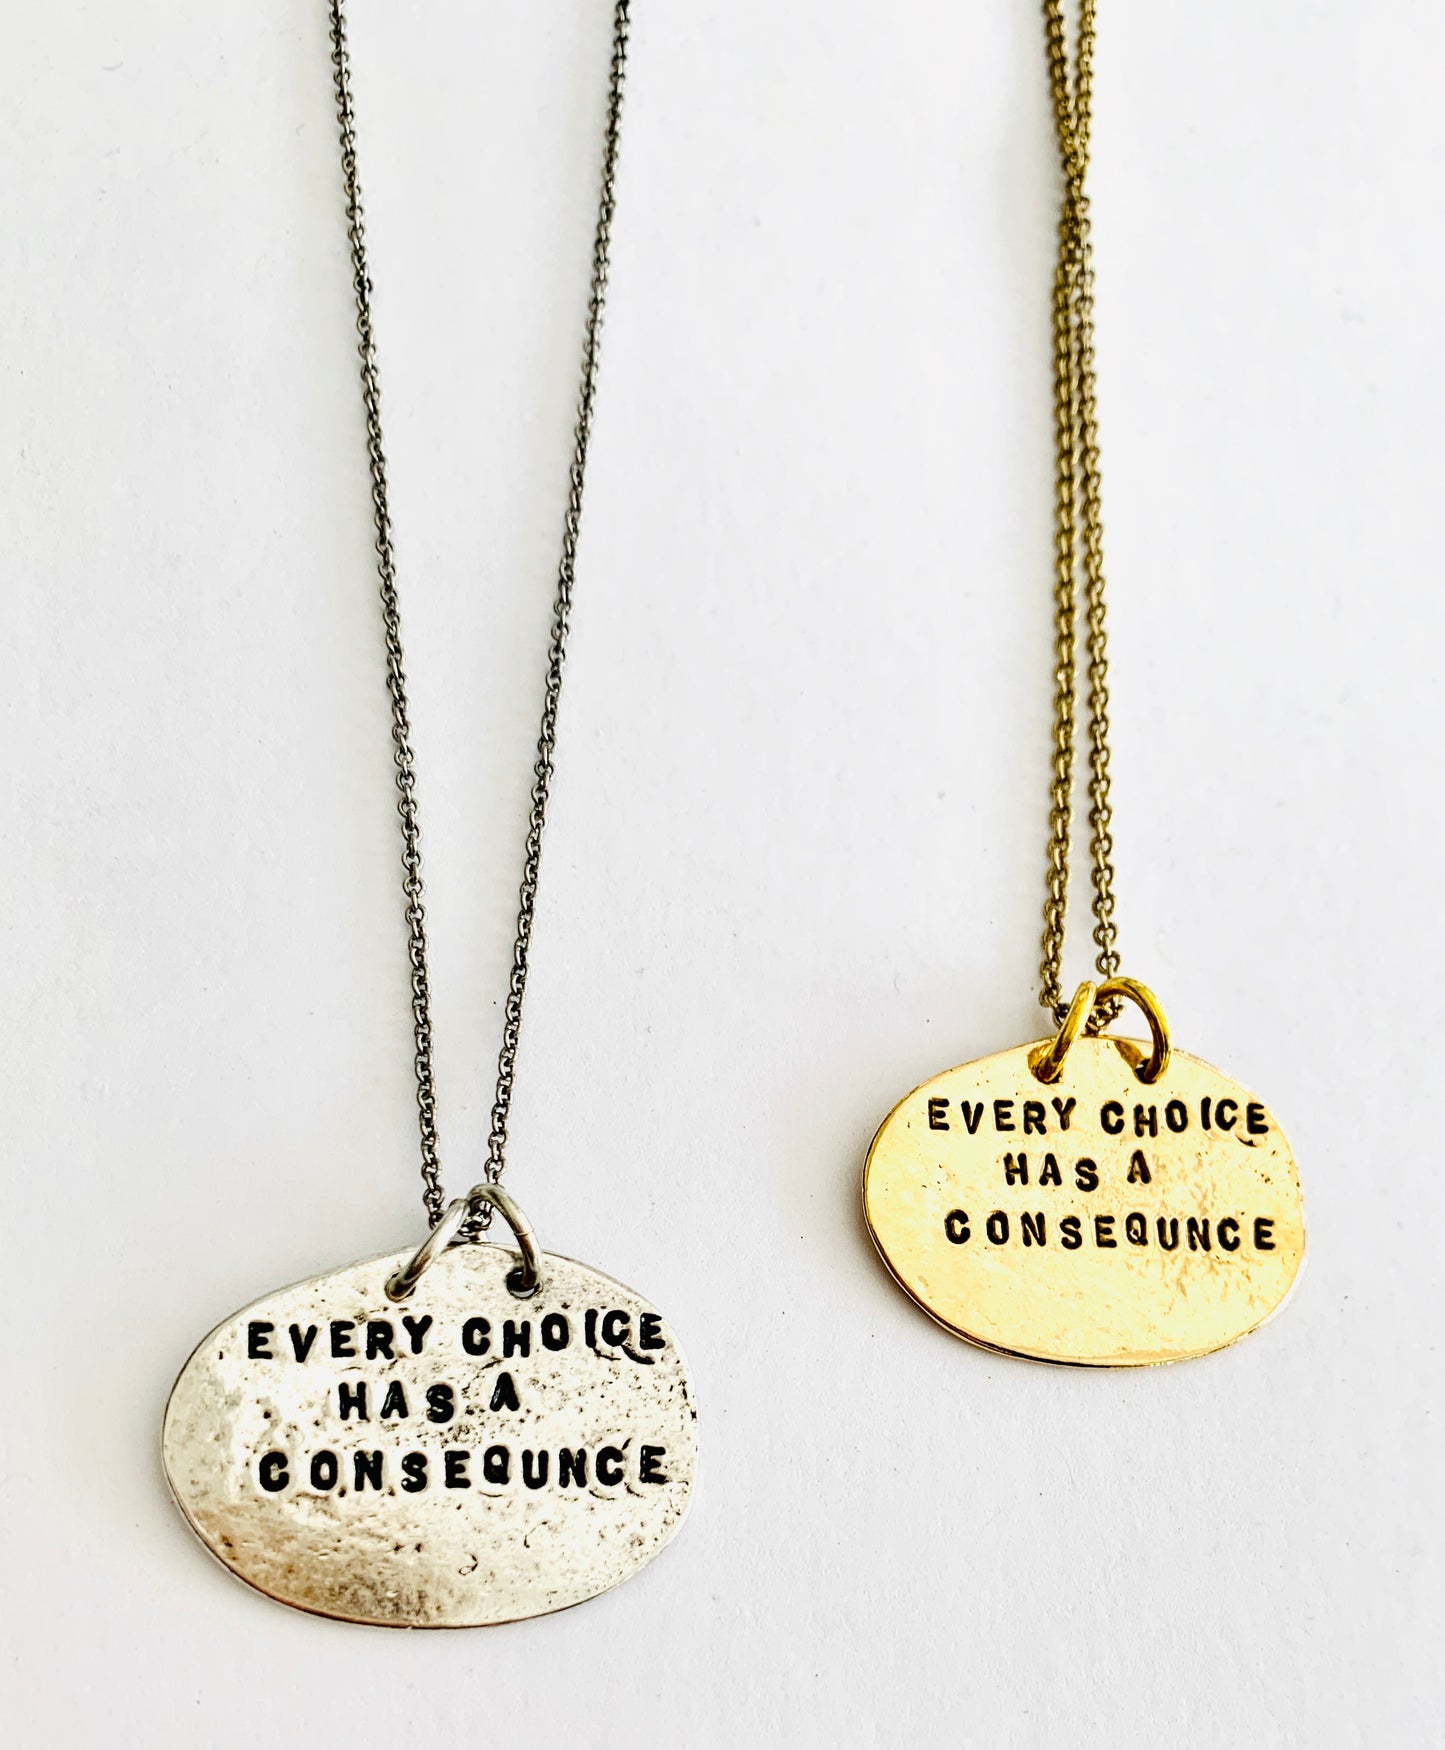 Every choice has a consequence necklace